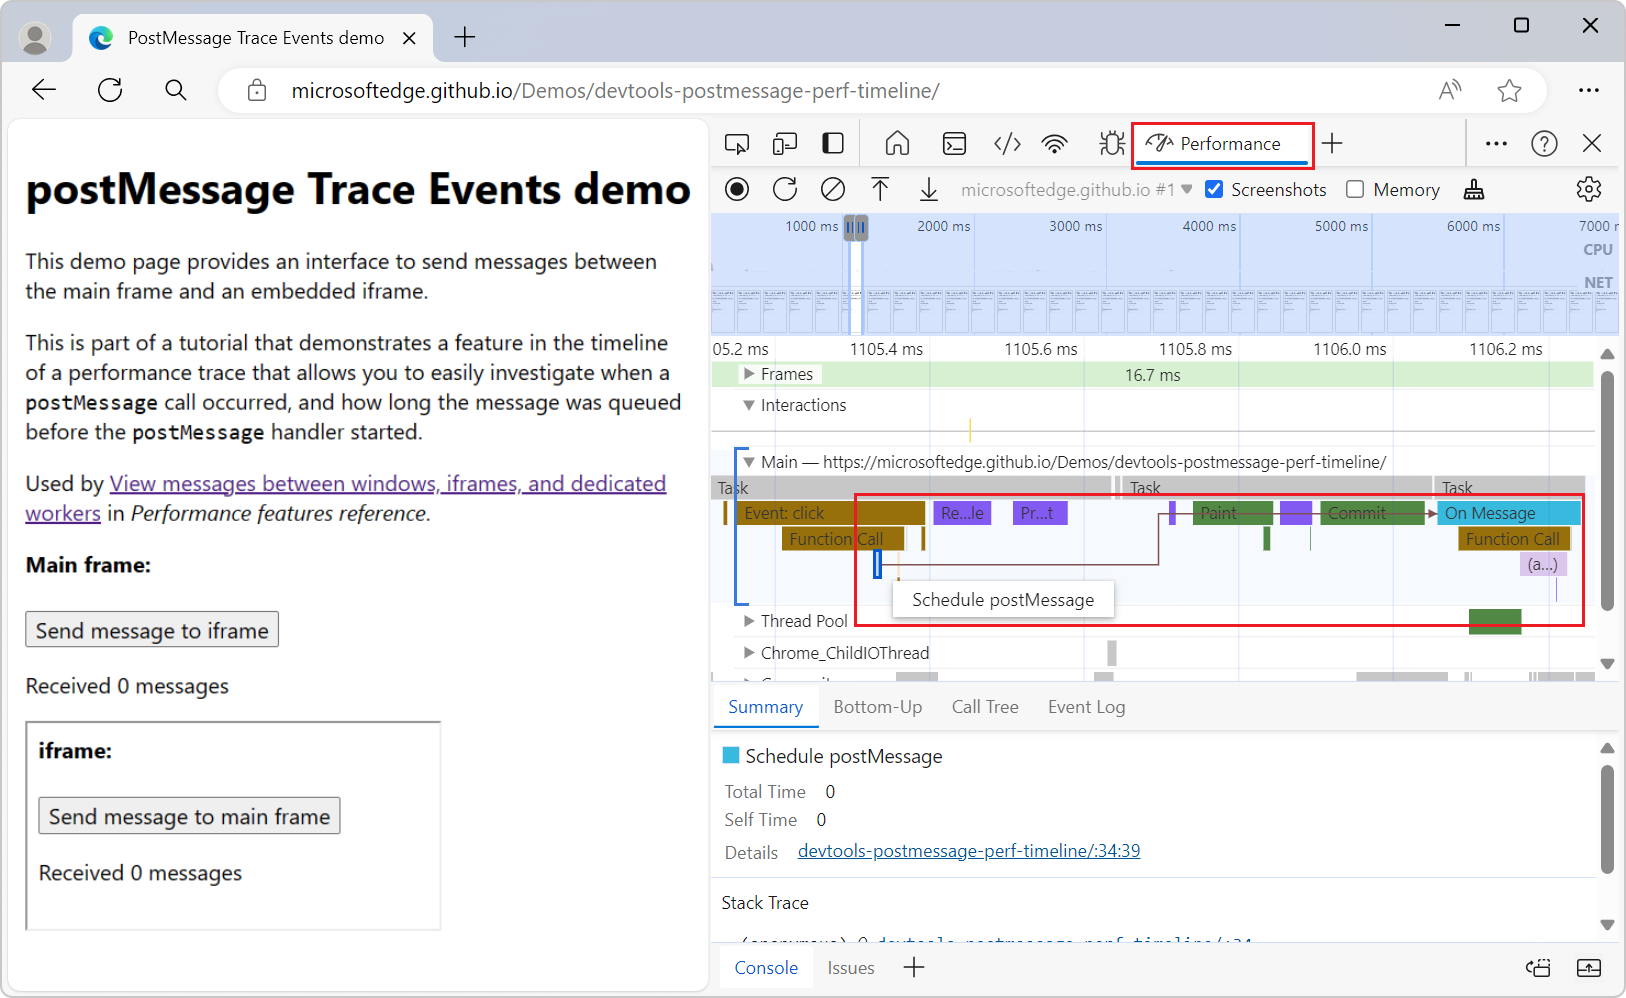 "Schedule postMessage" events and "On Message" events in the Performance tool